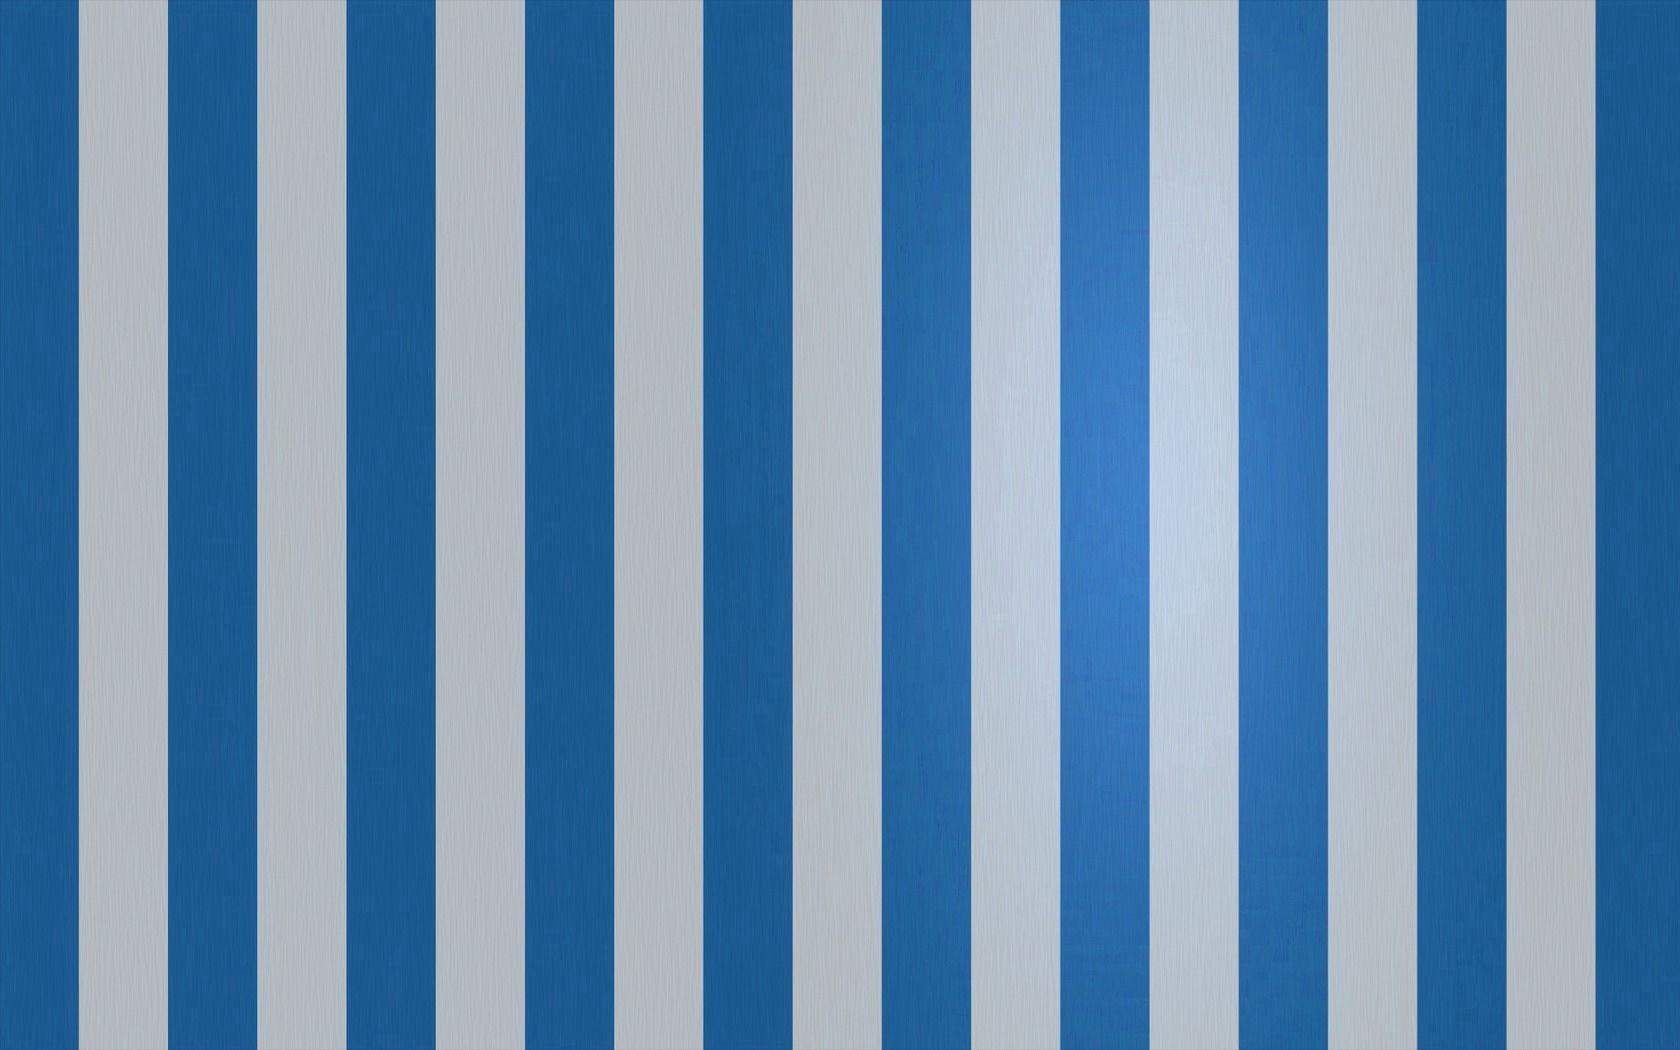 130011 download wallpaper streaks, vertical, stripes, texture, lines, textures, surface screensavers and pictures for free